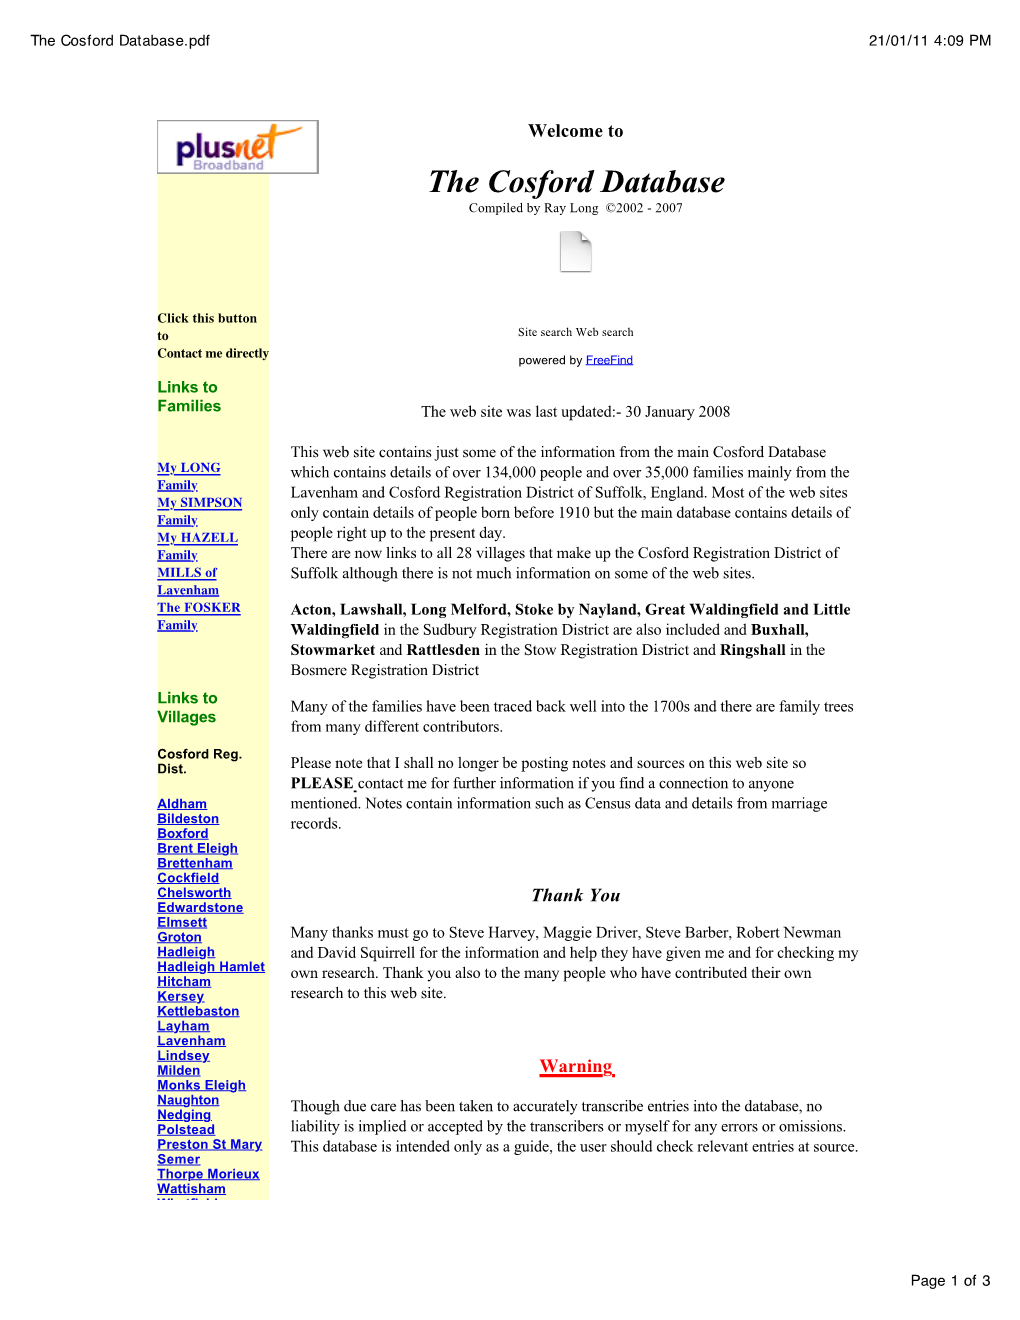 The Cosford Database.Pdf 21/01/11 4:09 PM